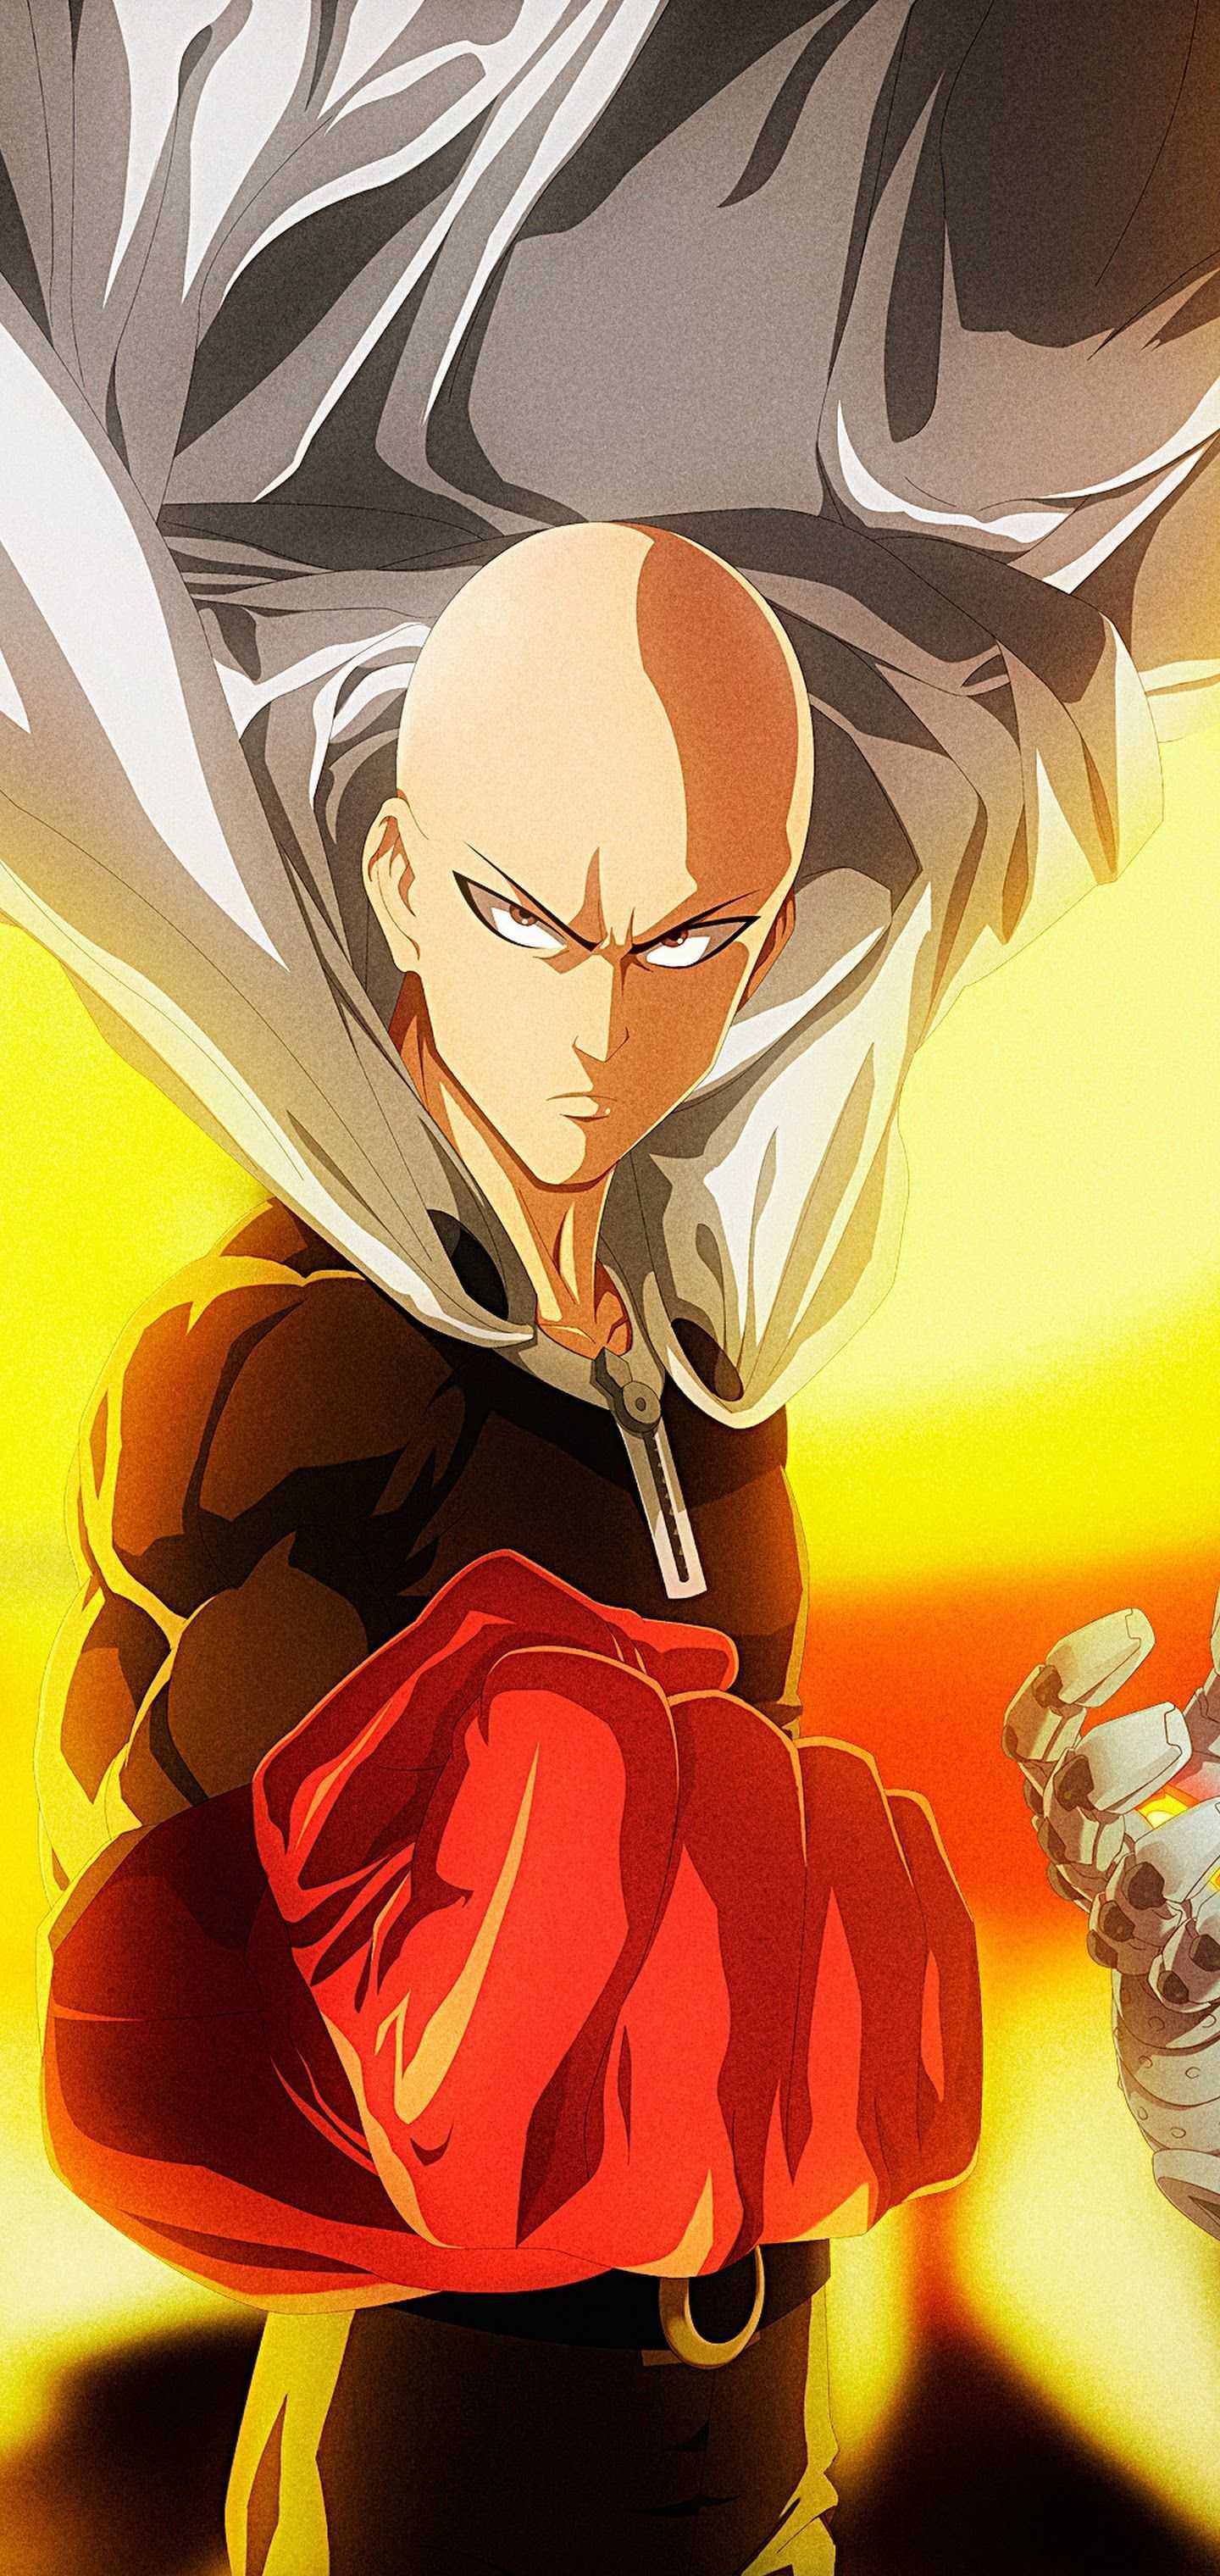 One Punch Man 4k PC Wallpapers - Wallpaper Cave